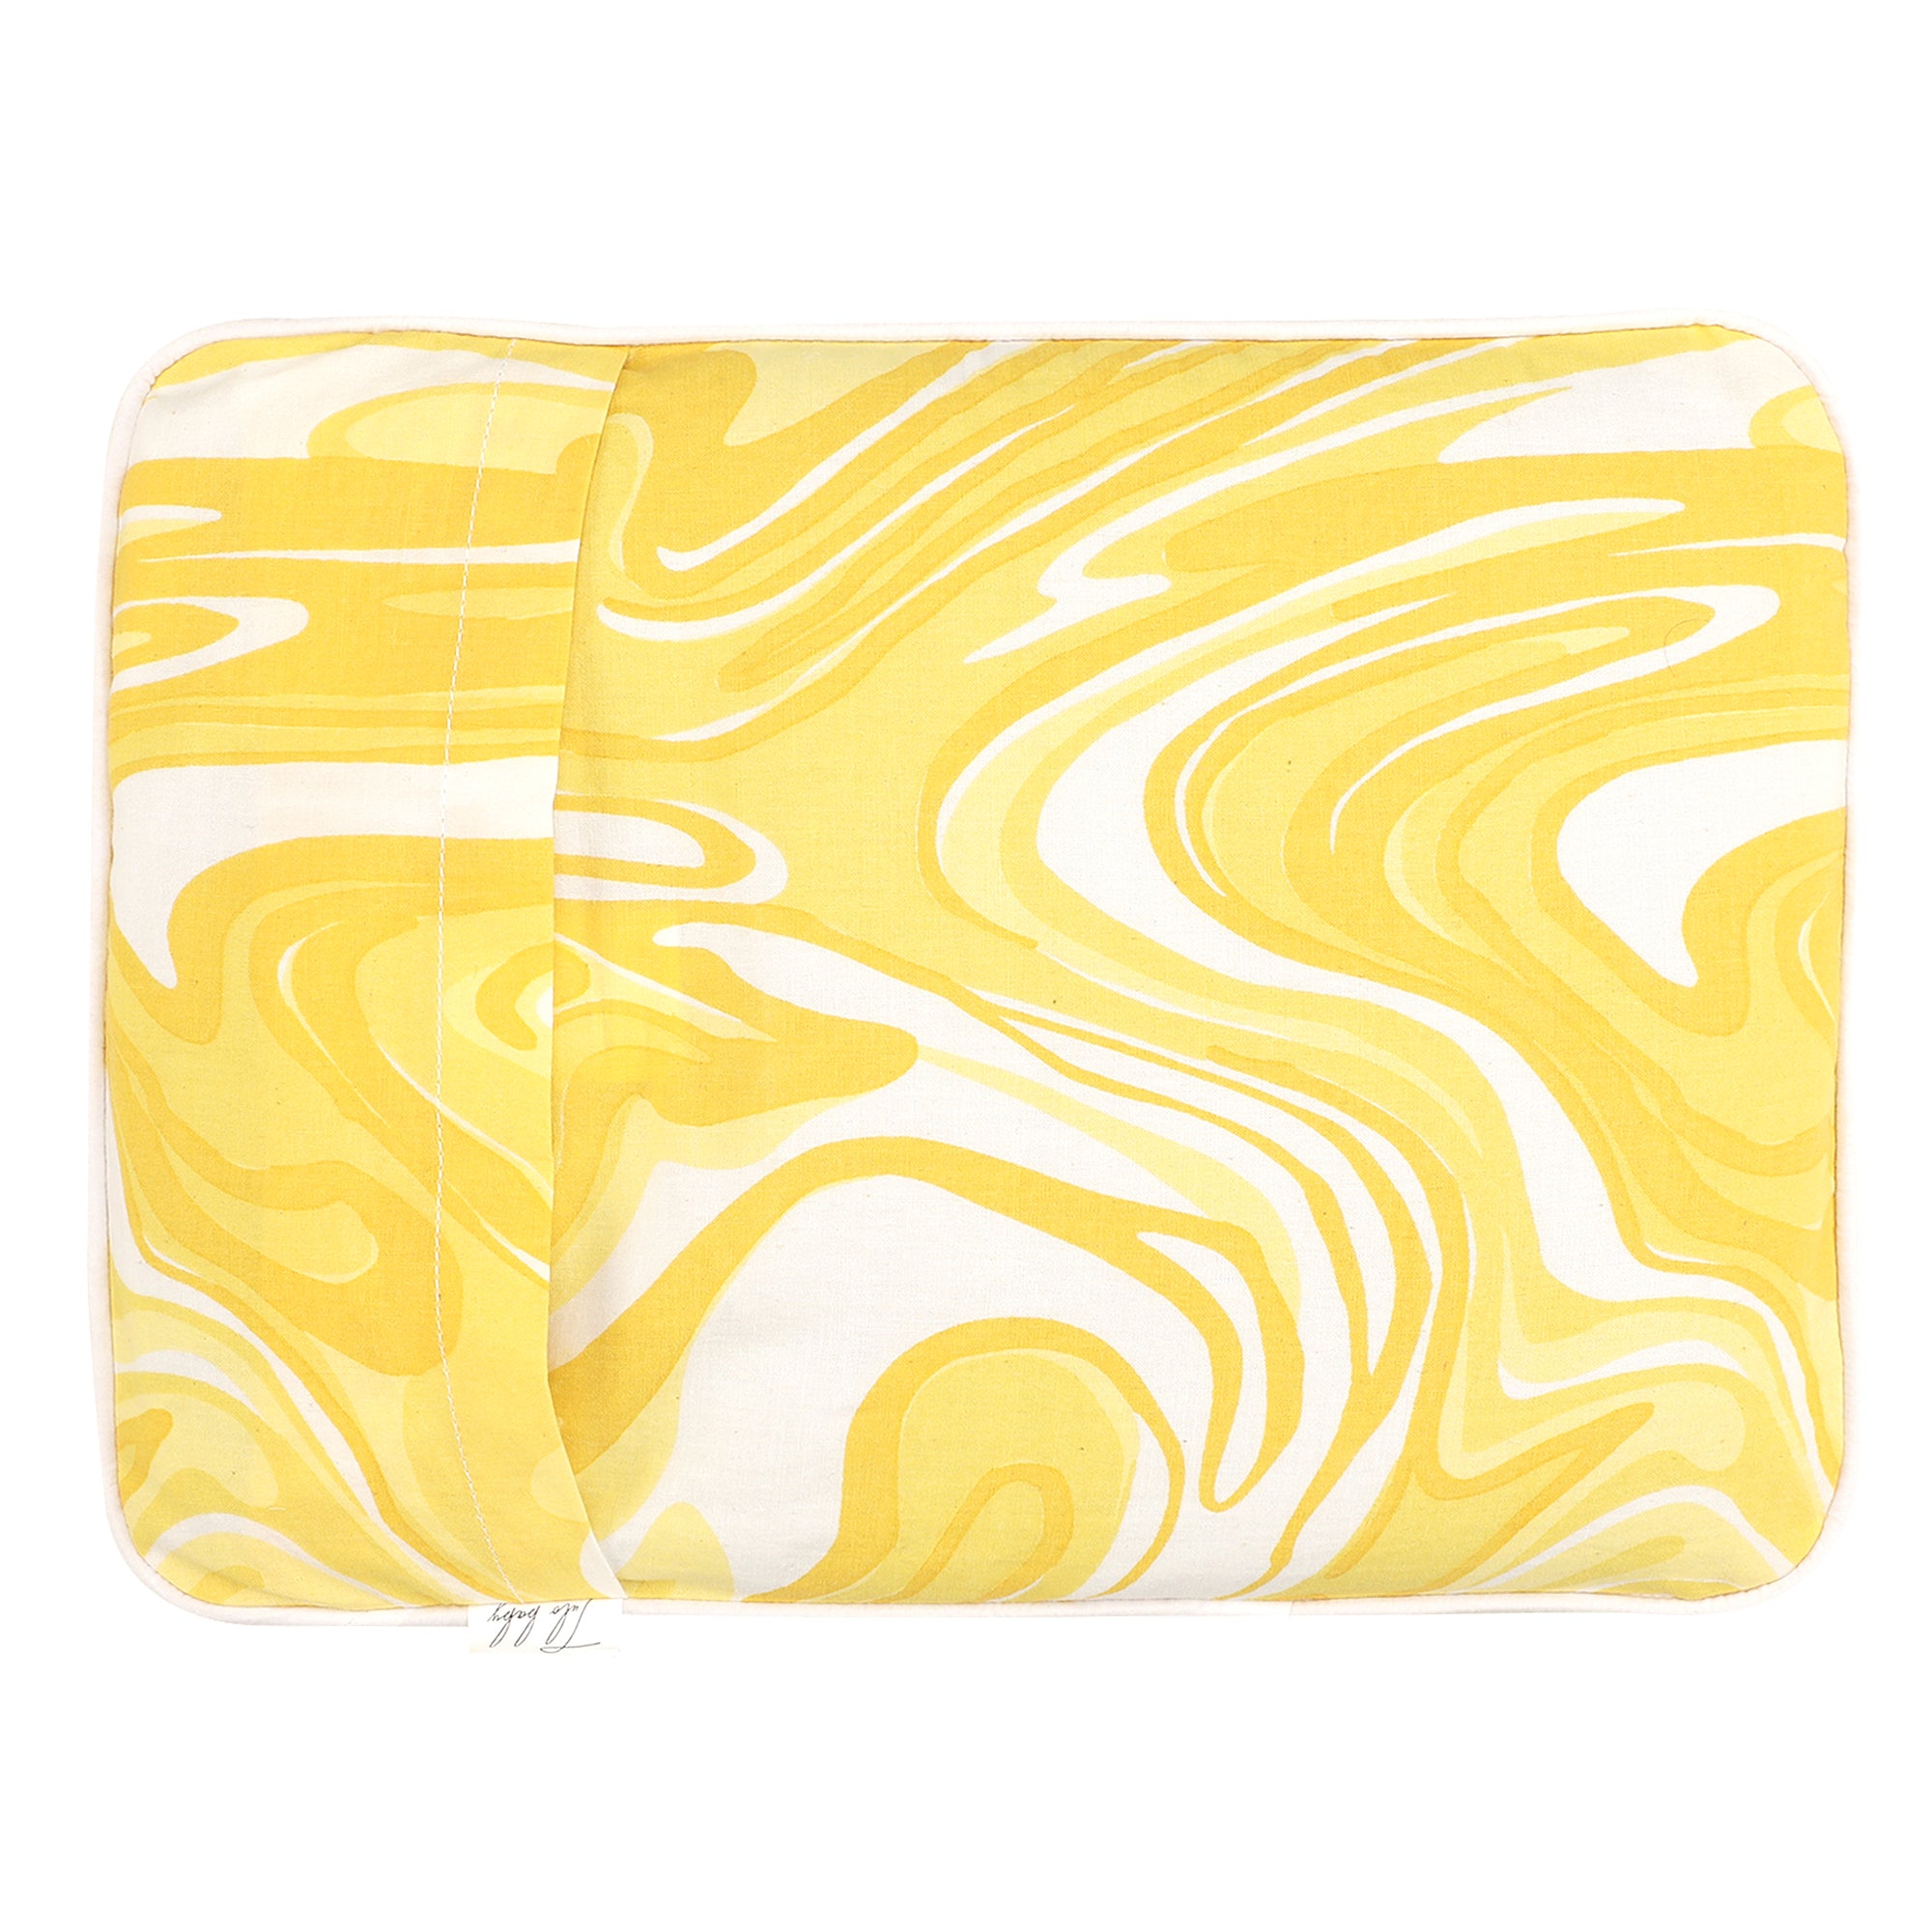 YOLK YELLOW MARBLE MUSTARD PILLOW COVER AND FILLER SET